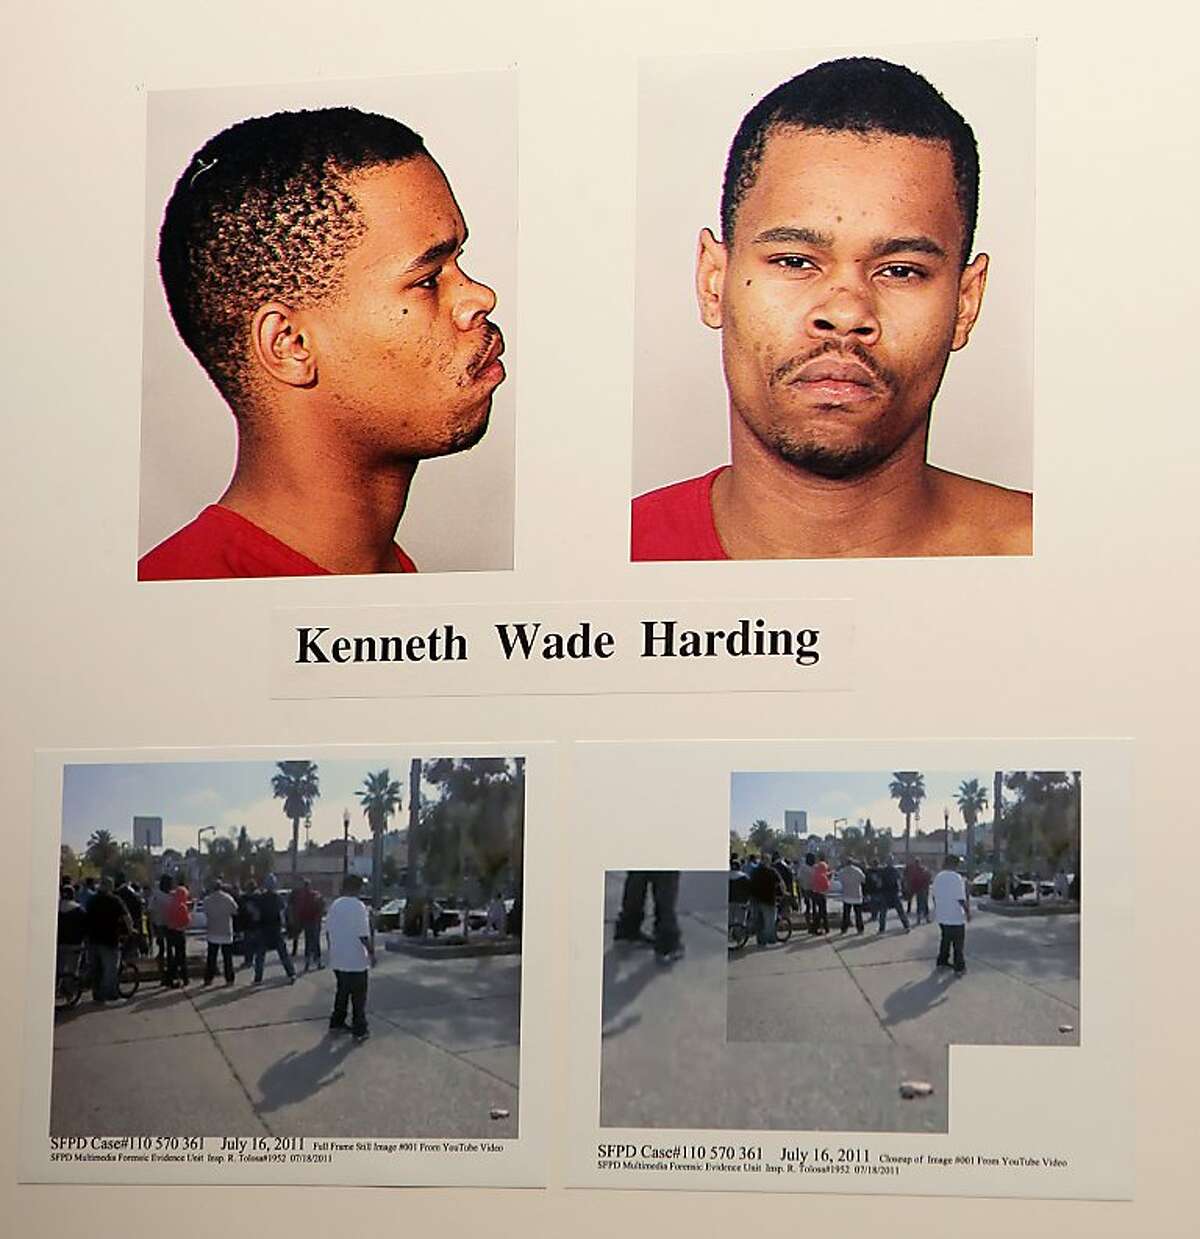 Mug of suspect Kenneth Wade Harding on Monday, July 18, 2011 at the Hall of Justice in San Francisco, Calif., shown in the press conference about the recent officer involved in shooting him on 3rd and Palou Ave.